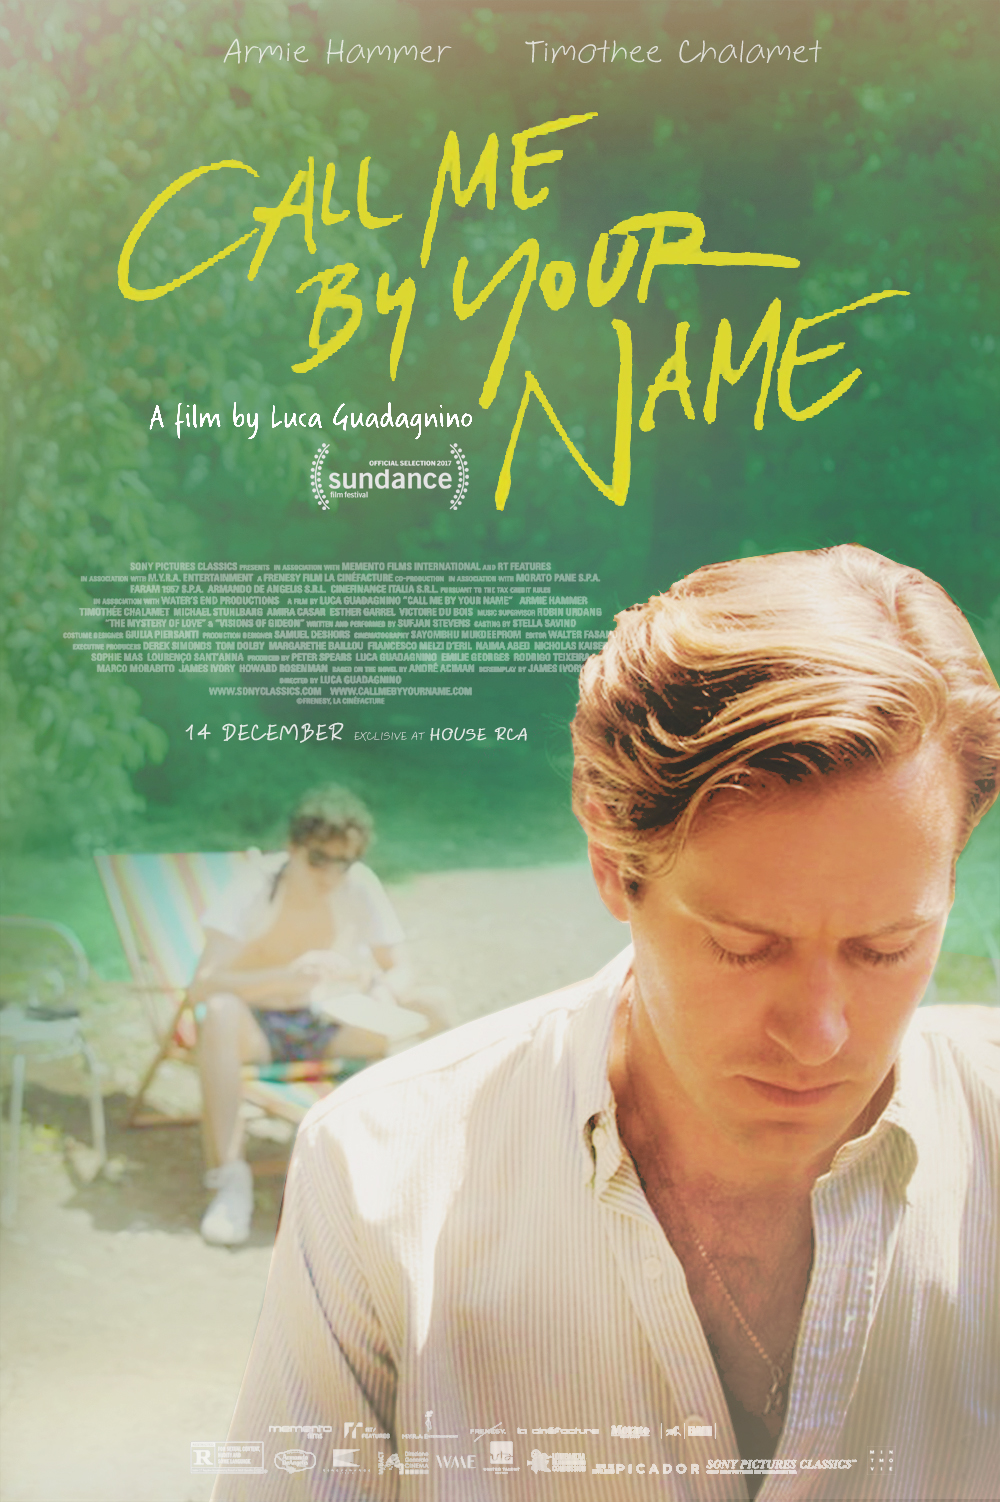 Call me by your name, le film de Luca Guadagnino Call_me_by_your_name___fanmade_poster_by_mintmovi3-dblwb7o